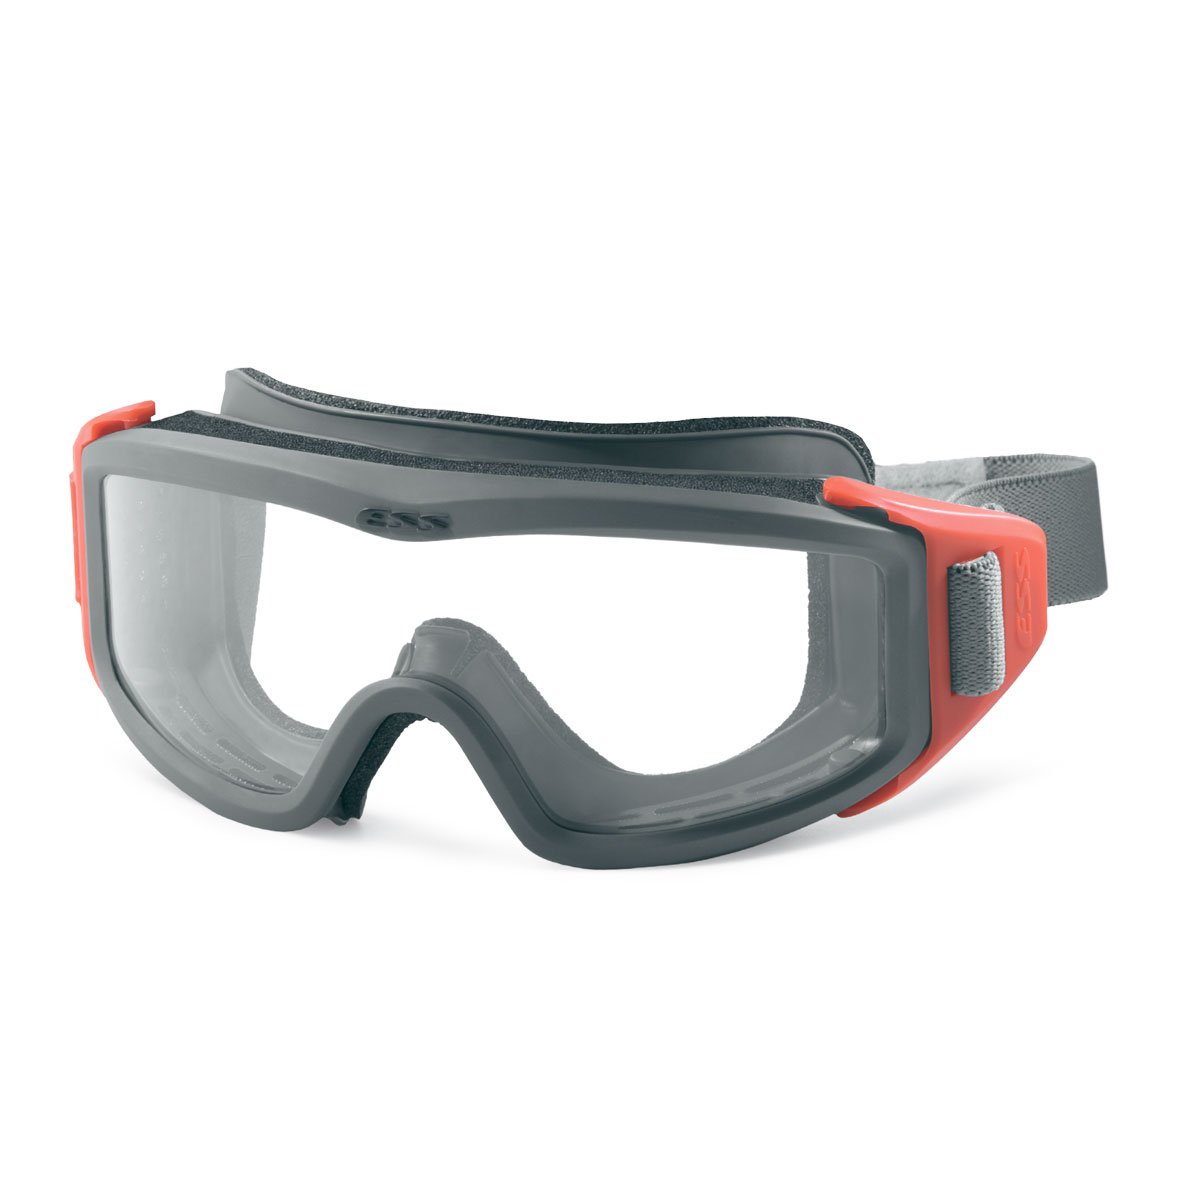 ESS Firepro 1977 FS Goggle Eyewear Eye Safety Systems Tactical Gear Supplier Tactical Distributors Australia